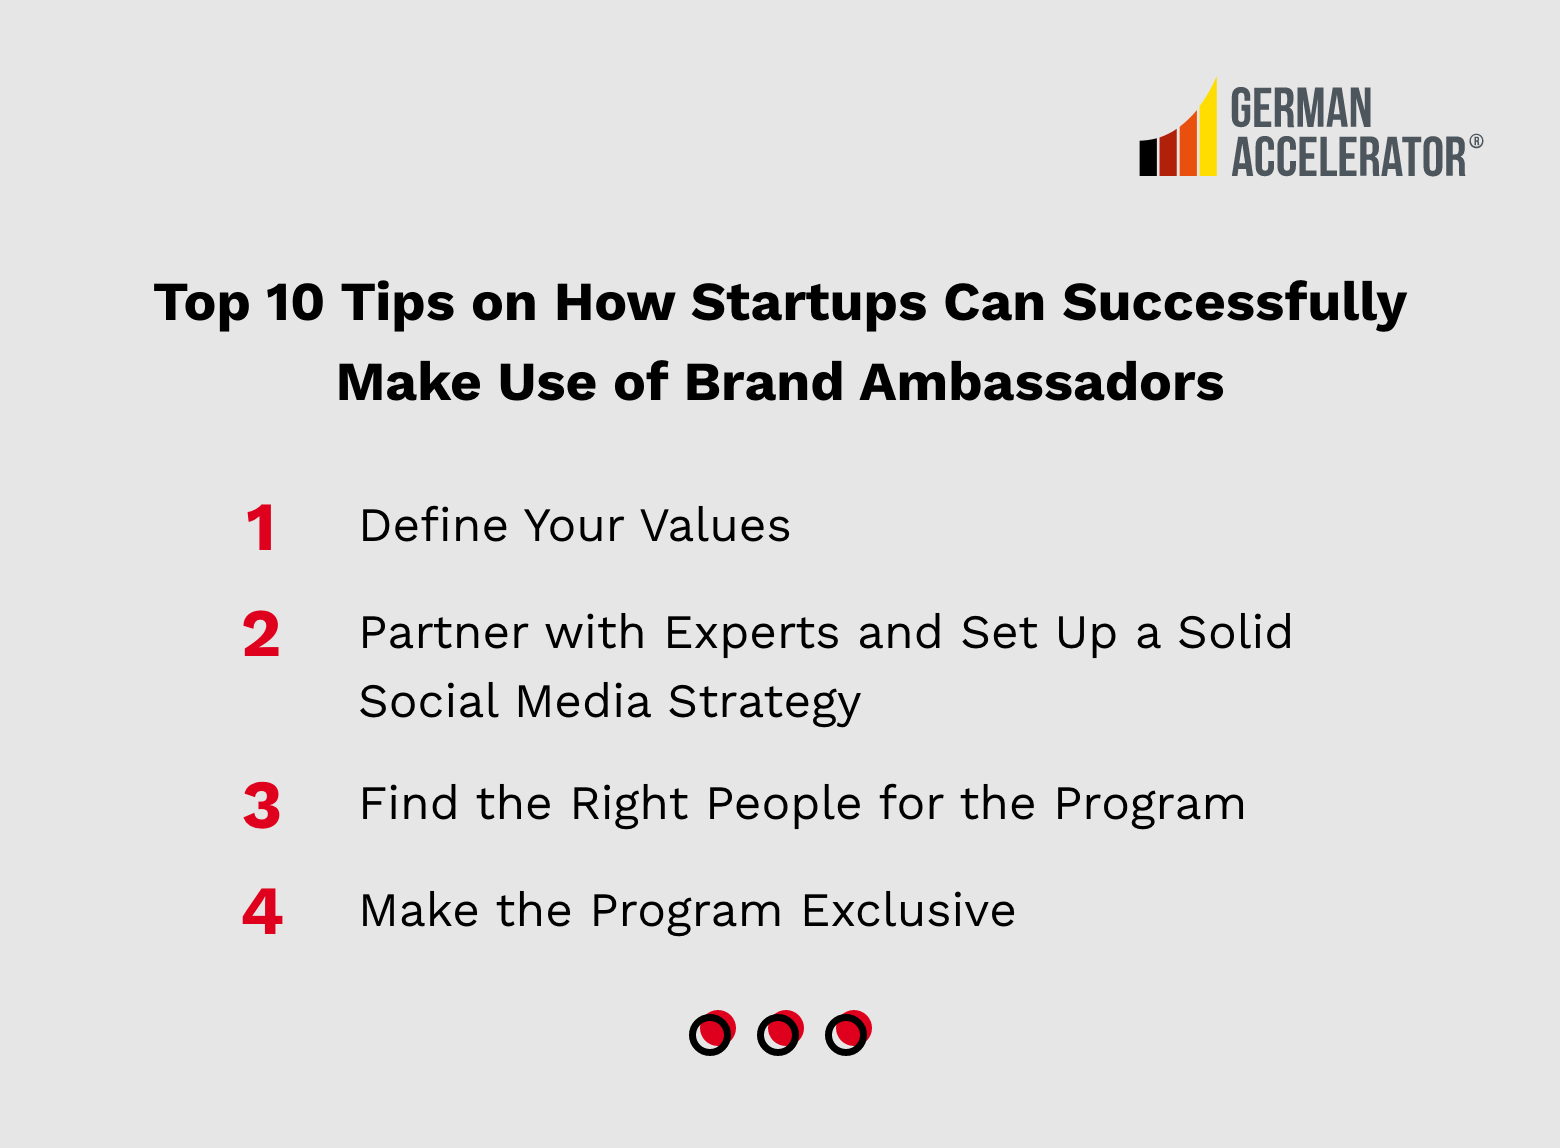 Top 10 Tips on How Startups Can Successfully Make Use of Brand Ambassadors